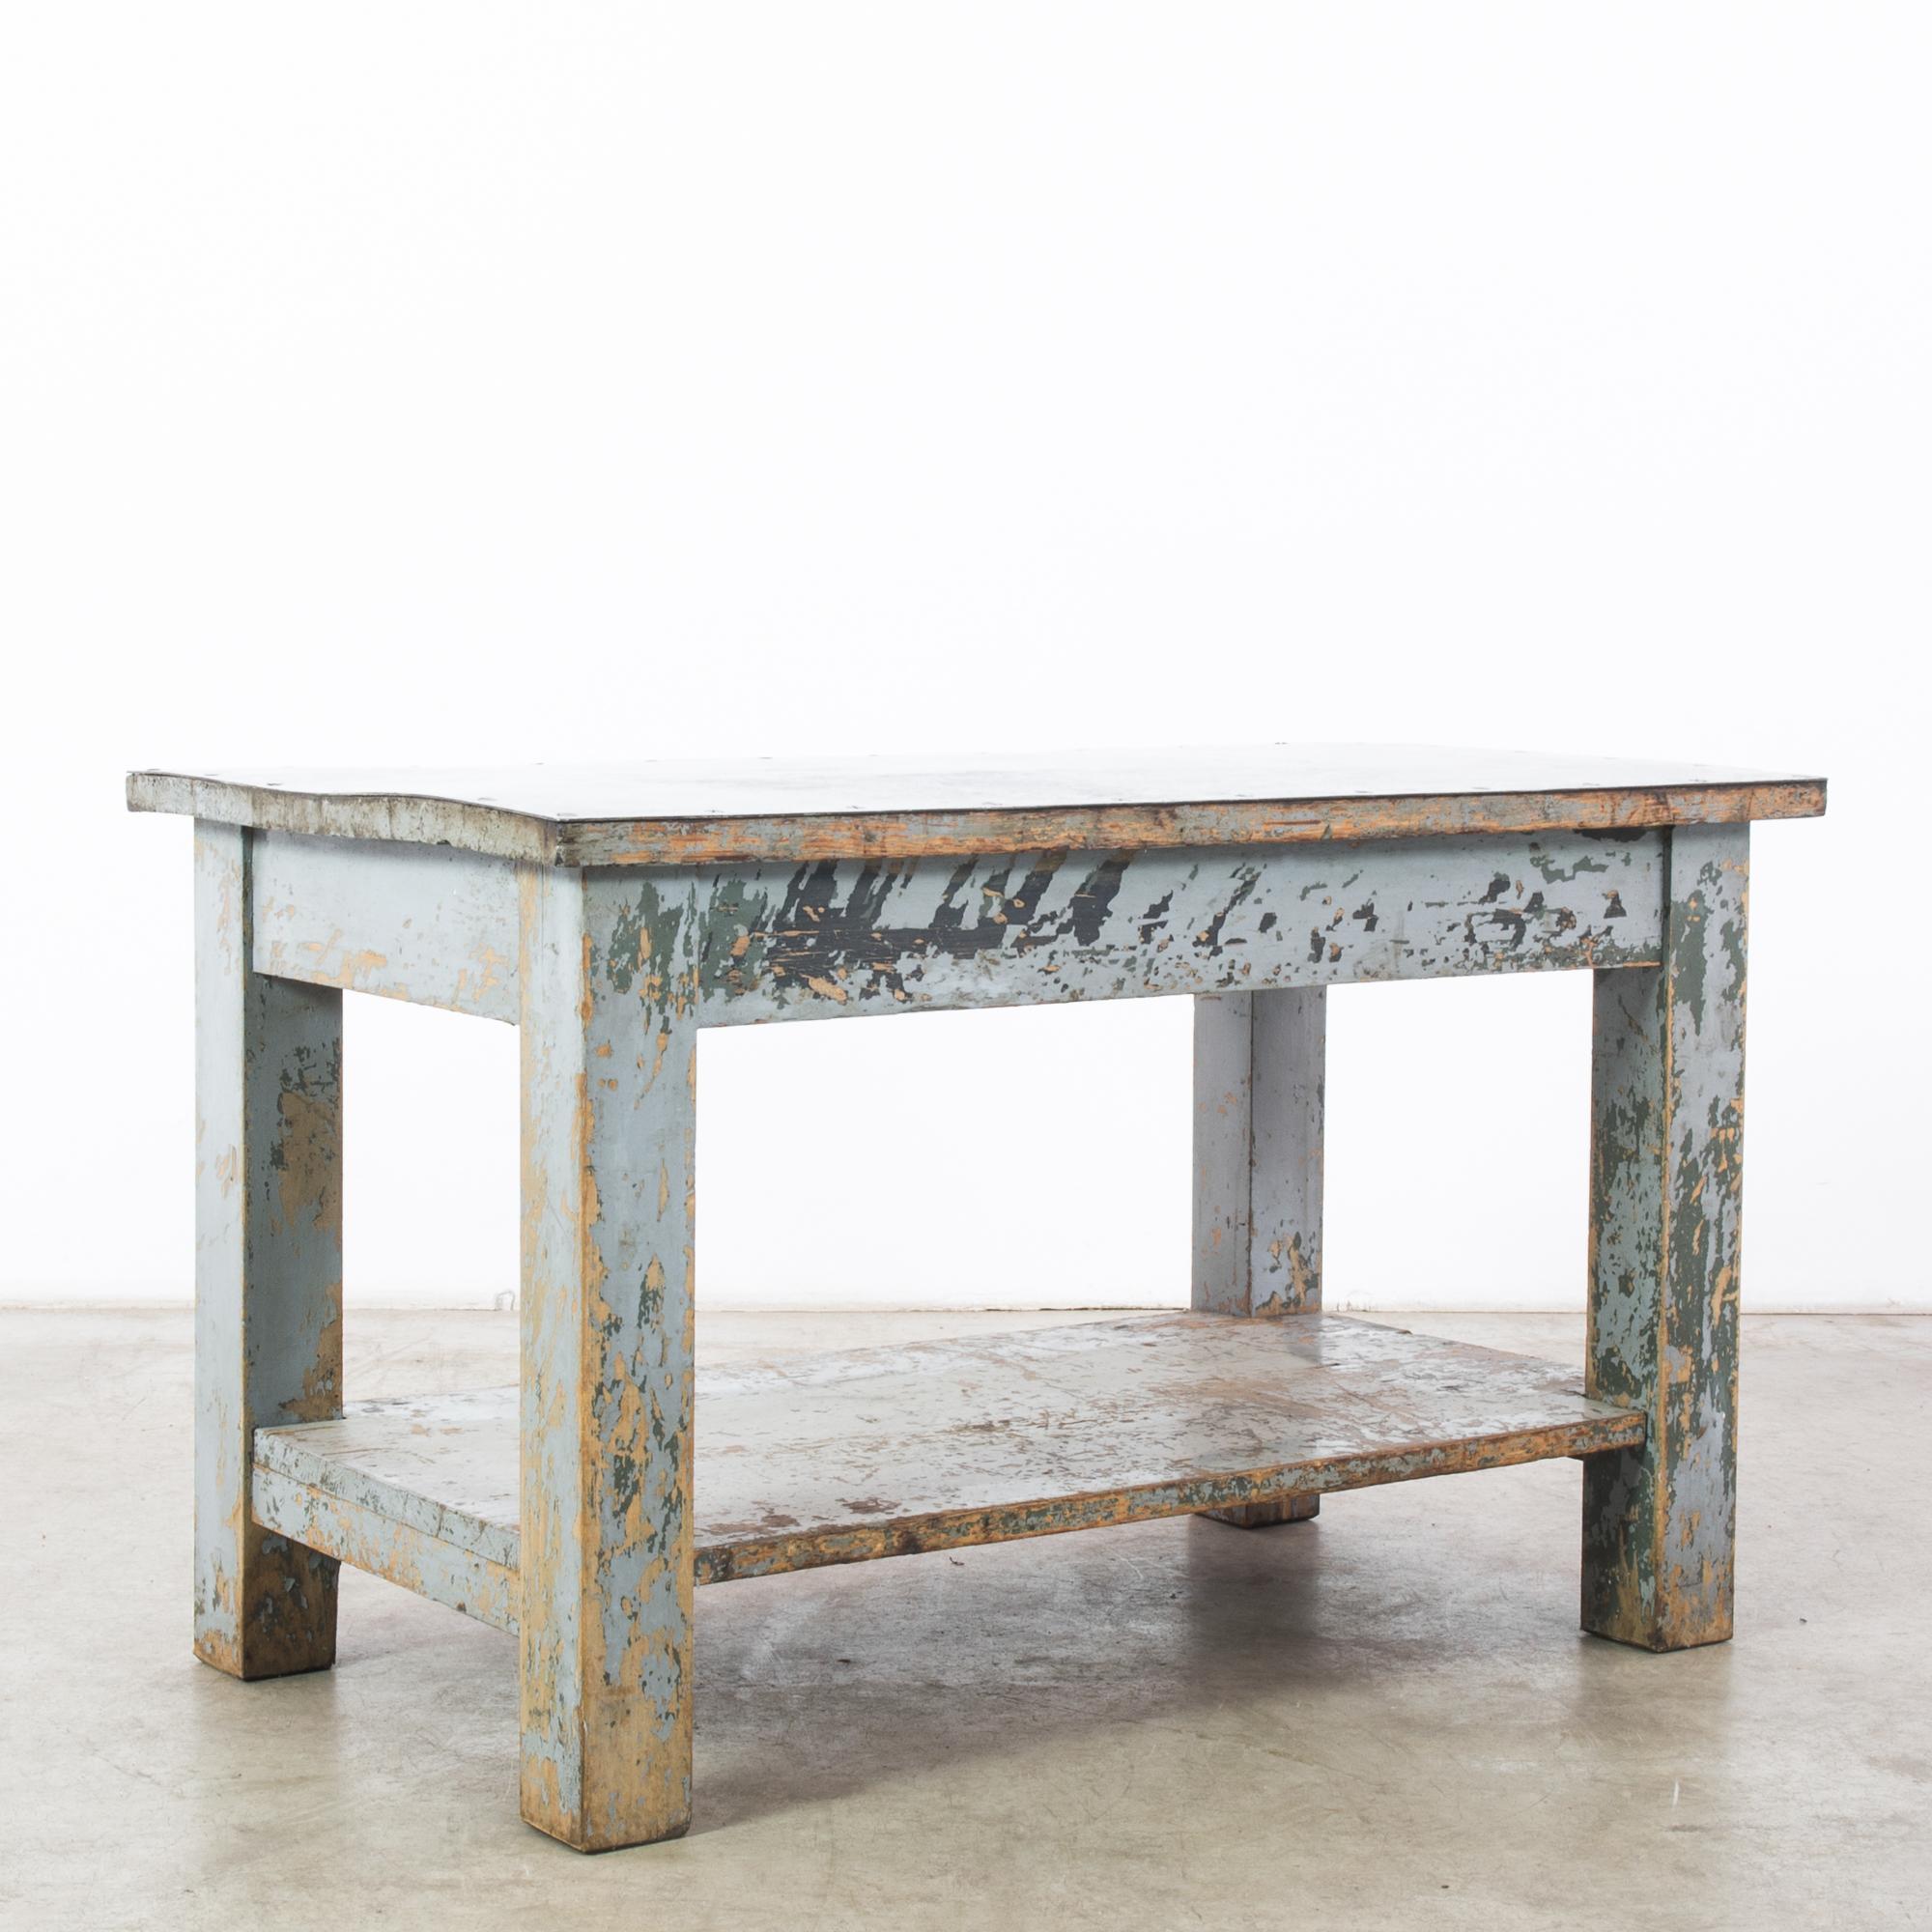 An industrial wooden side table from 1950s France with a unique patina. The simple, solid shape is enlivened by the interplay of colors: forget-me-not blue, sea green, black and natural wood. The surface of the table is capped with a sheet of metal,